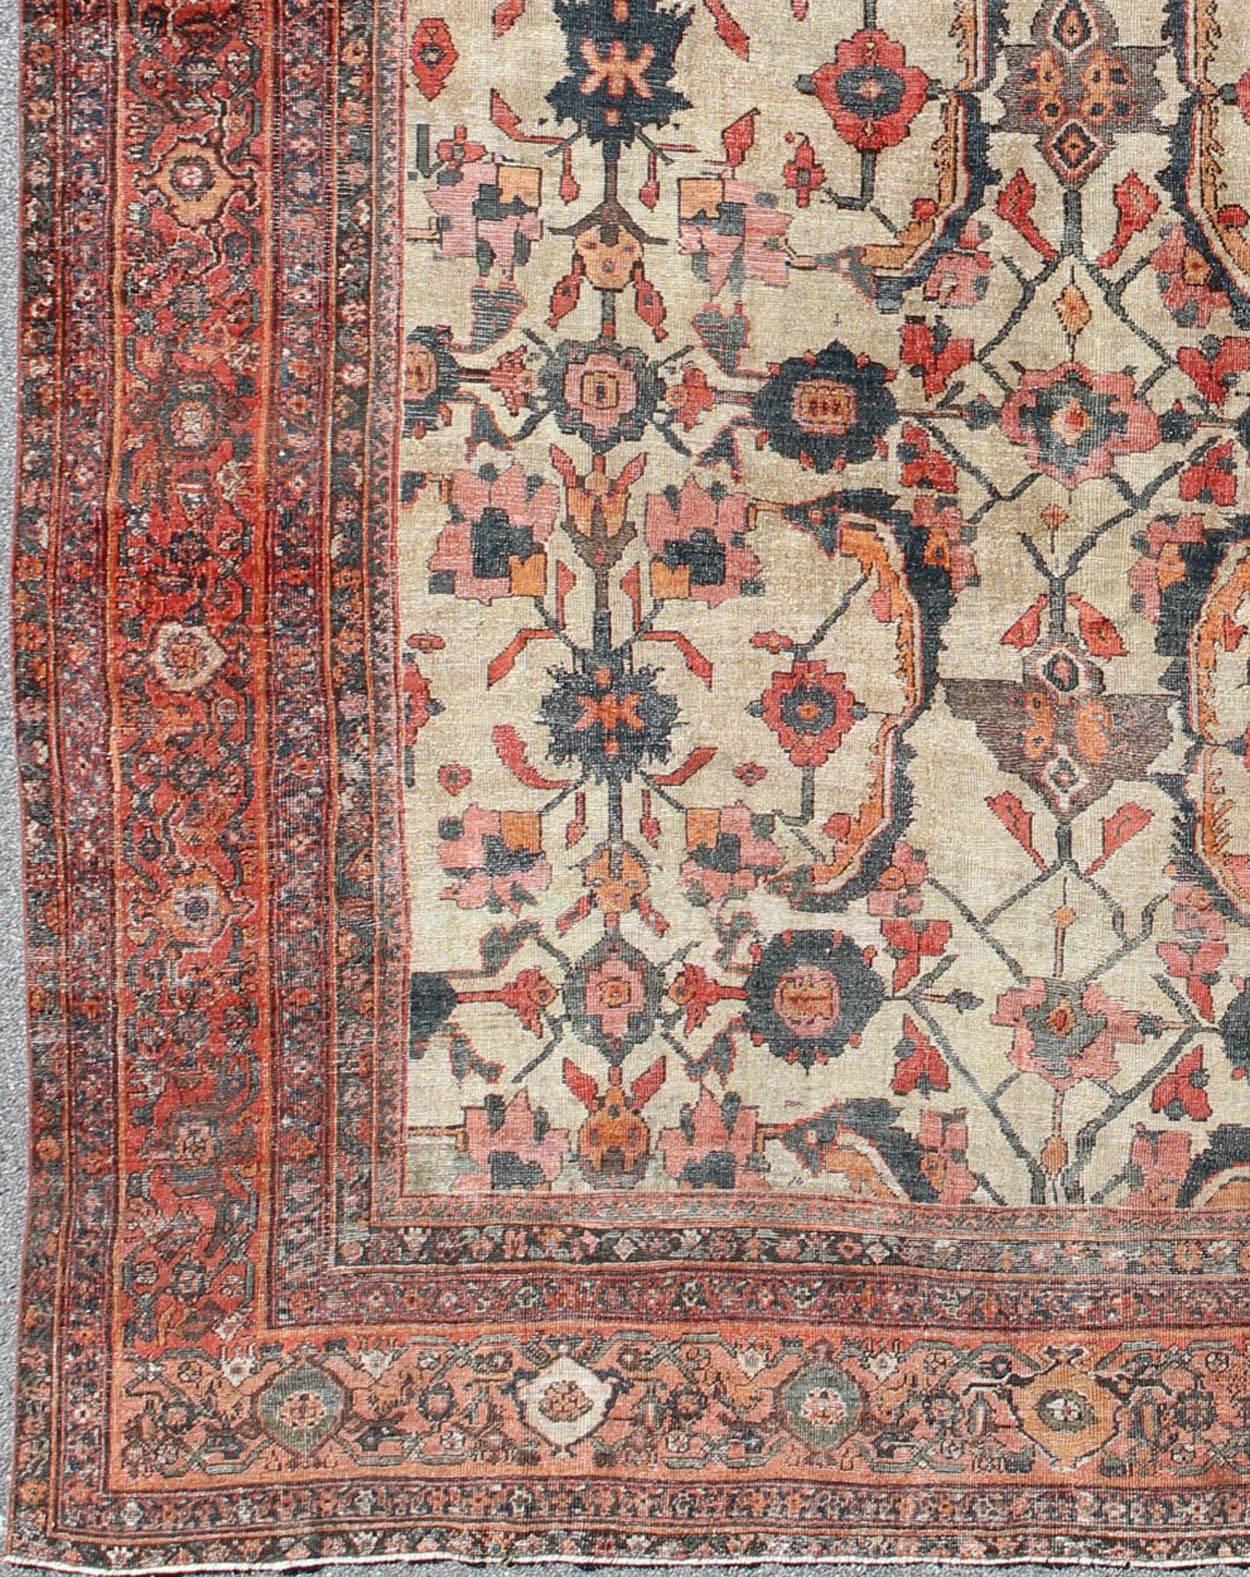 Antique Persian Sultanabad rug with vining floral pattern in ivory background along with red, orange, gray blue and charcoal. Keivan Woven Arts /  rug NA-170090, country of origin / type: Iran / Sultanabad, circa 1880s. 
Measures: 12'6 x 16'6.
This